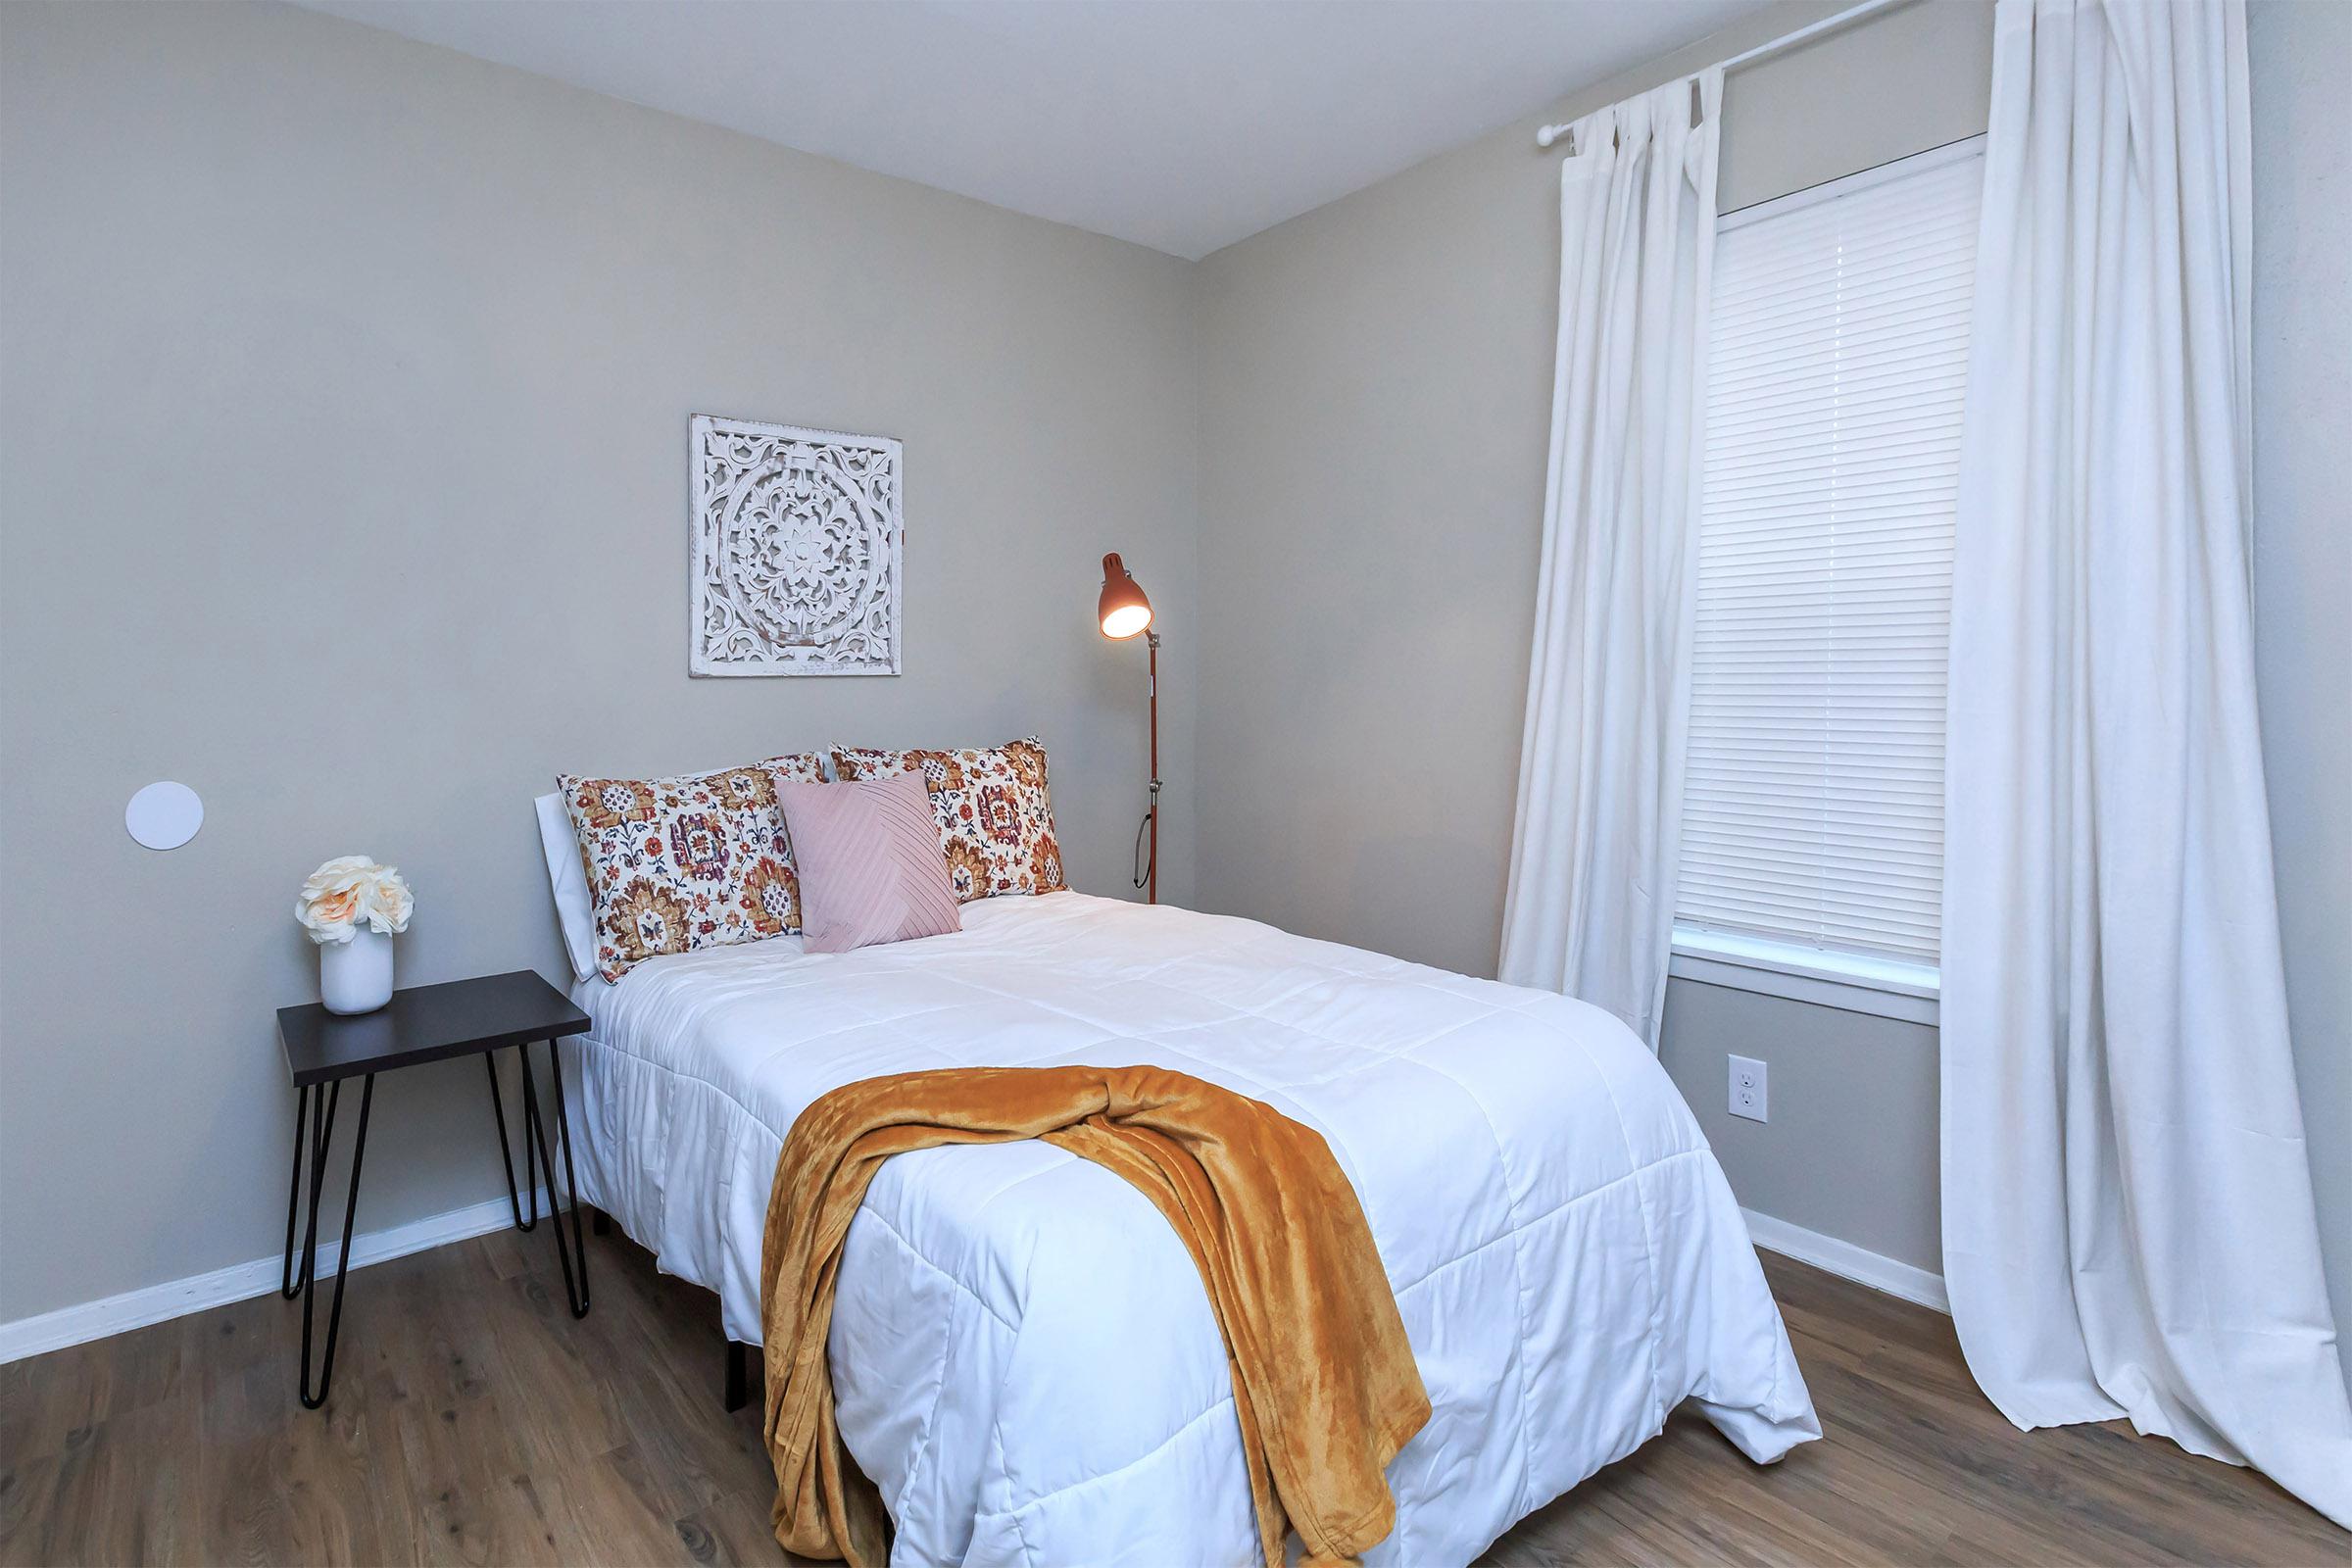 Bedroom with white bedding